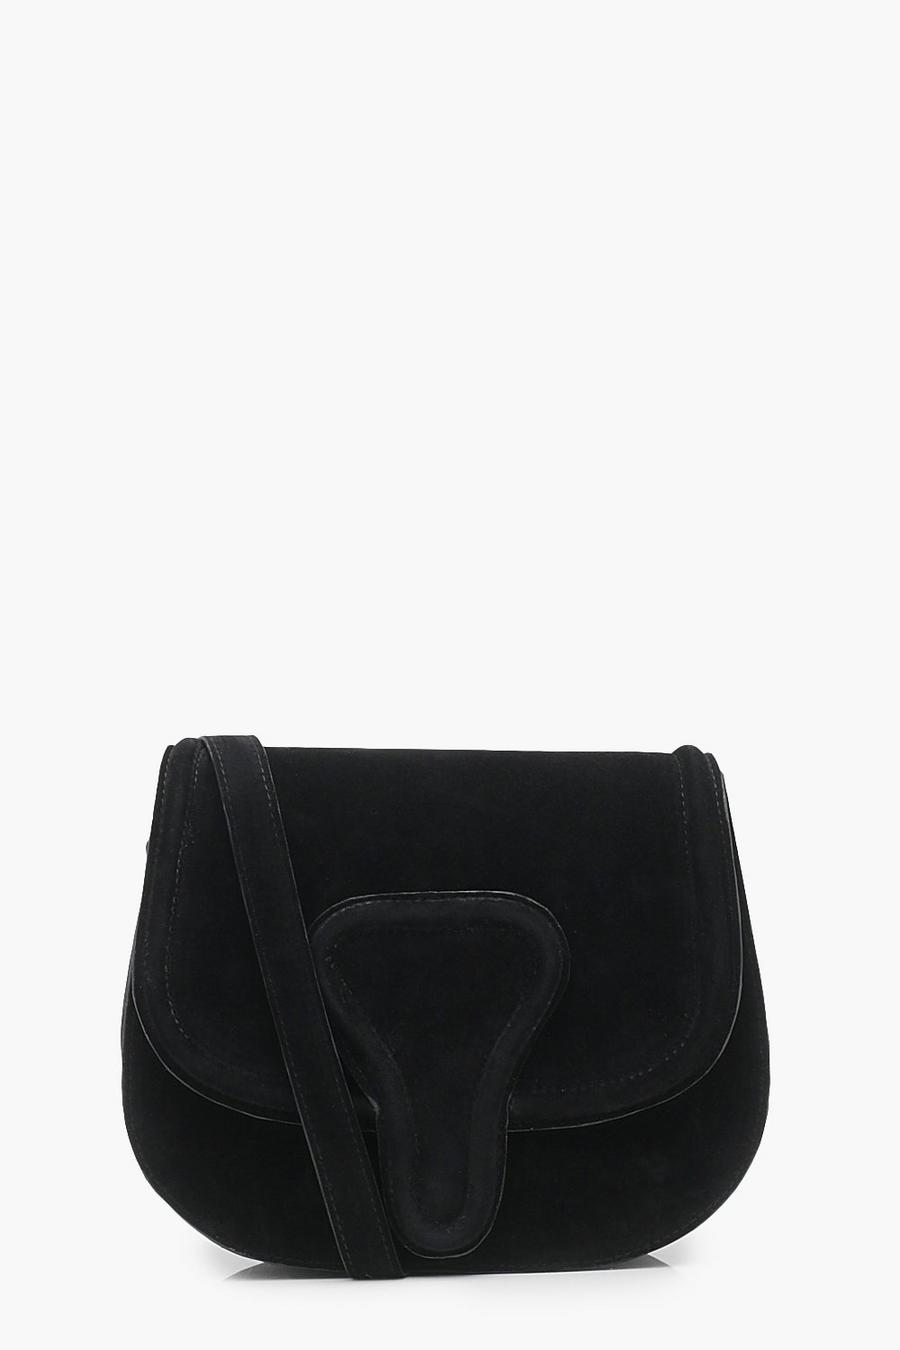 Black Rounded Cross Body With Buckle Detail image number 1